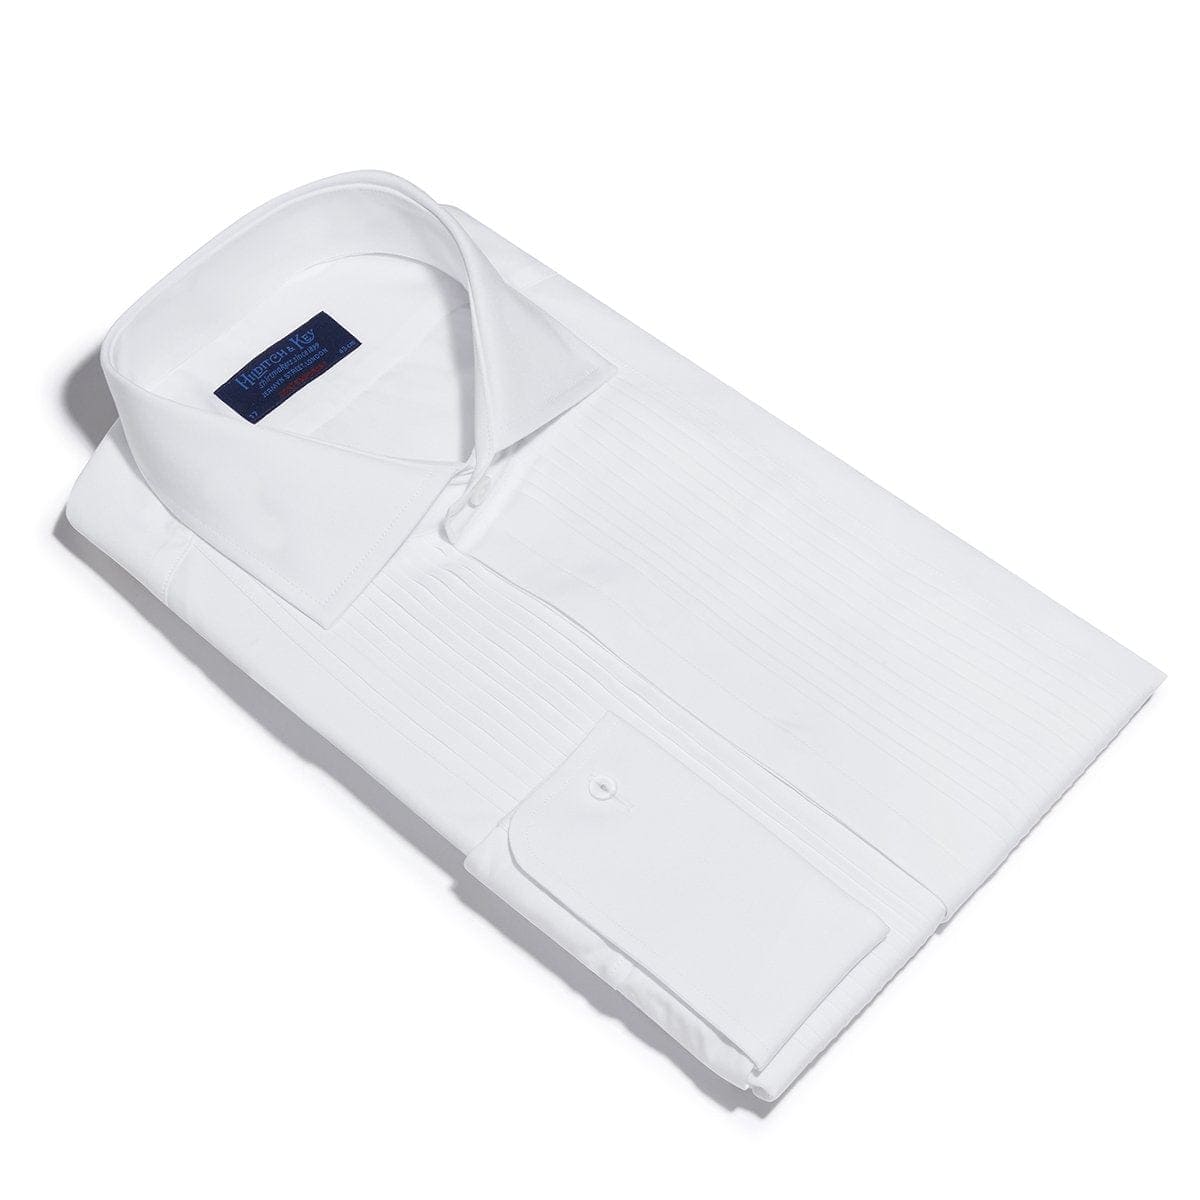 Contemporary Fit, Cutaway Collar, Double Cuff Dress Shirt With Pleated Front